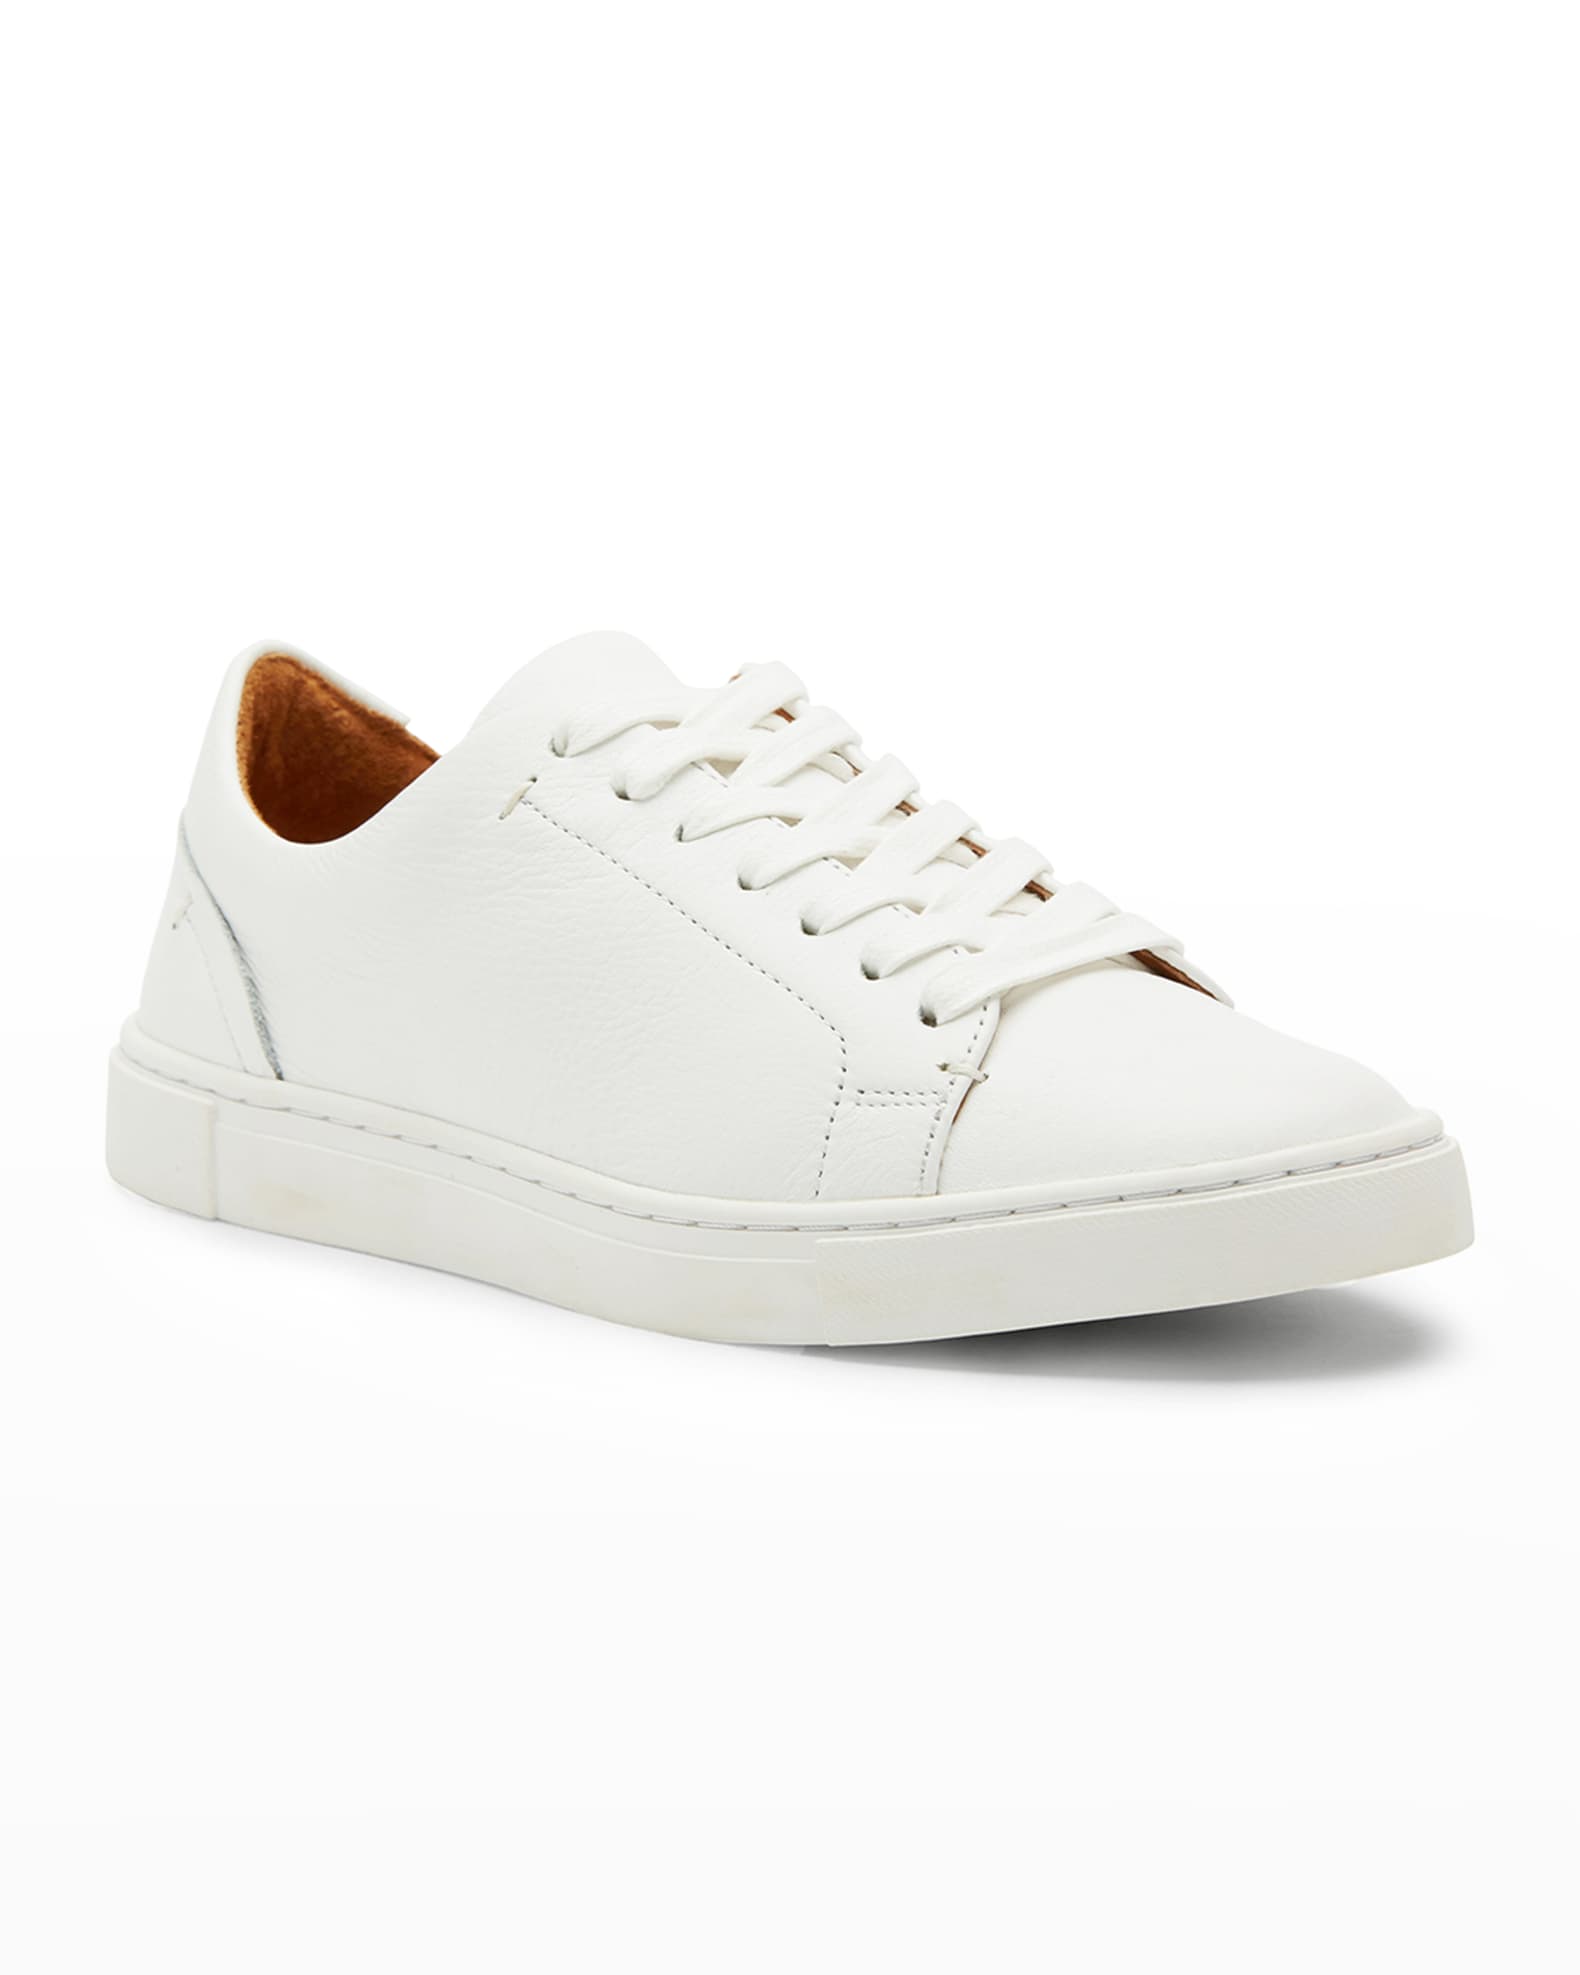 Frye Ivy Tumbled Leather Lace-Up Low-Top Sneakers | Neiman Marcus